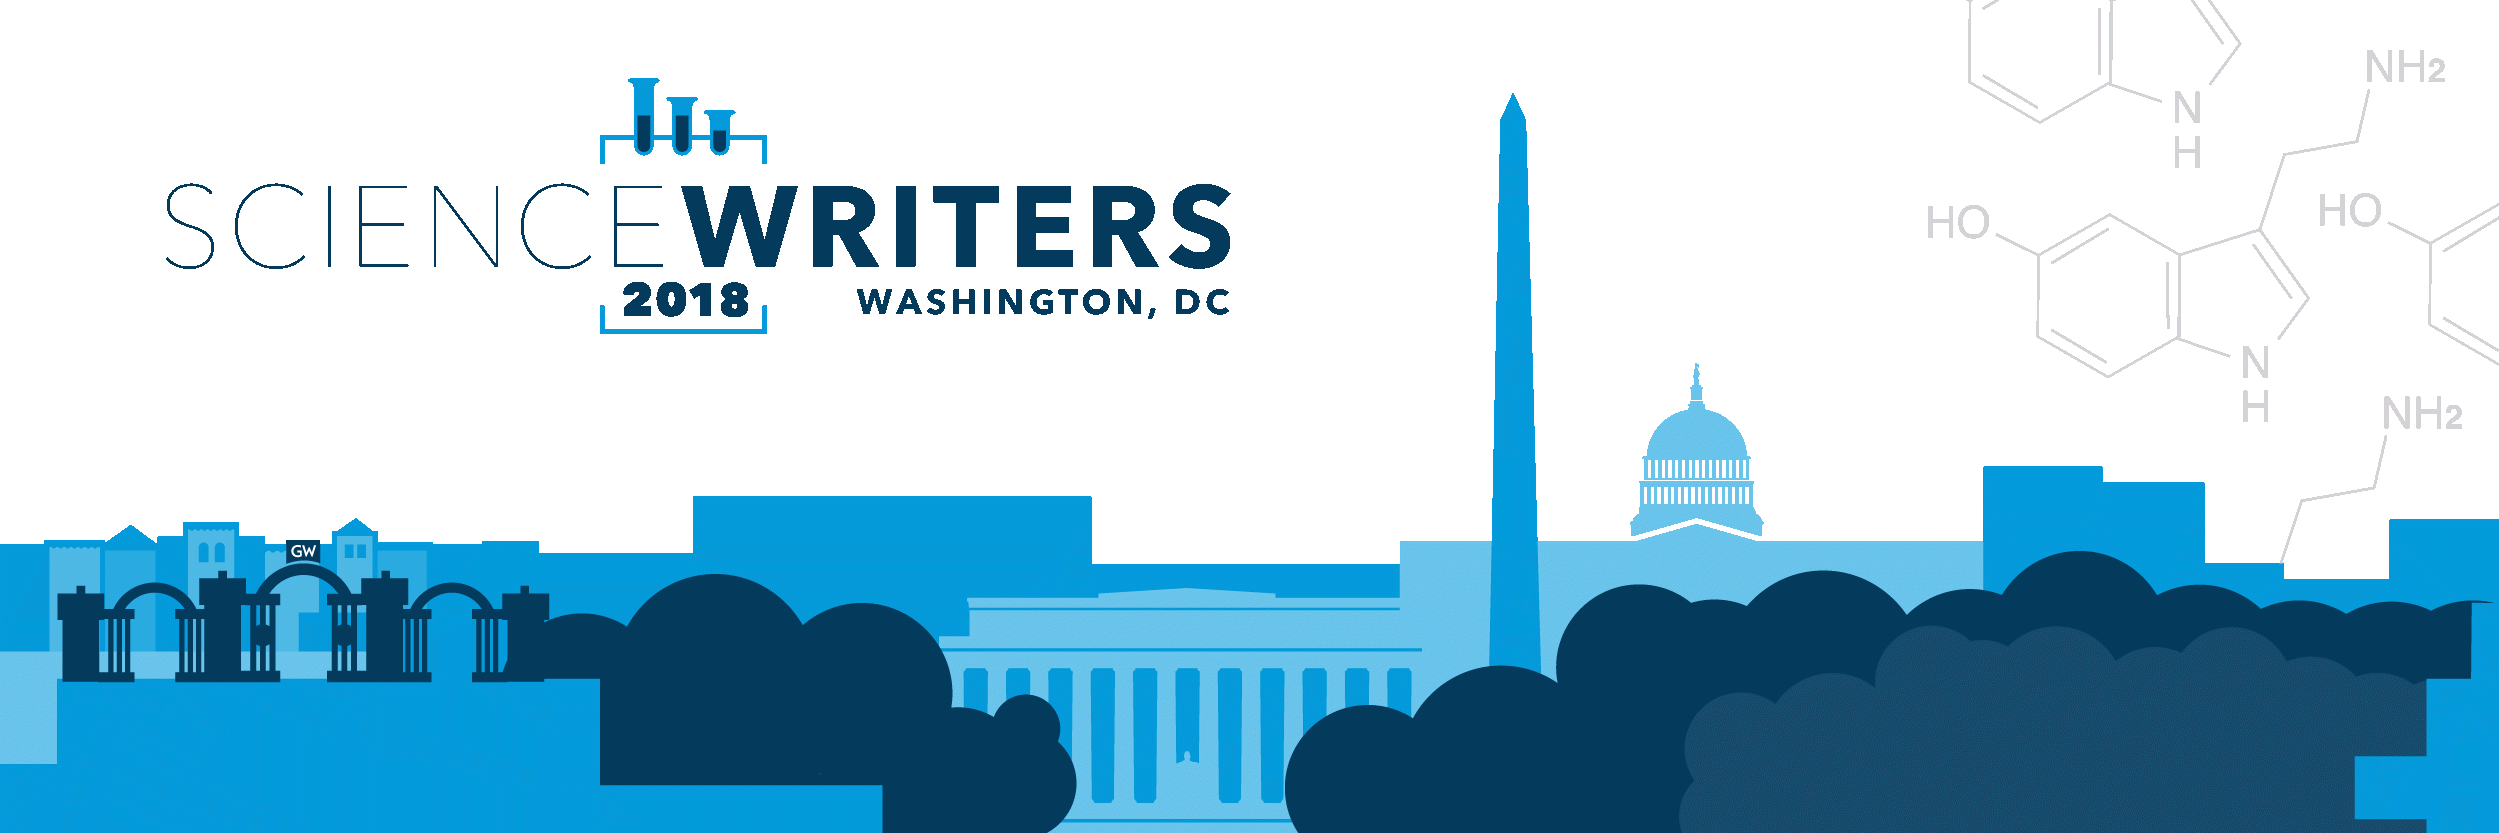 events ScienceWriters